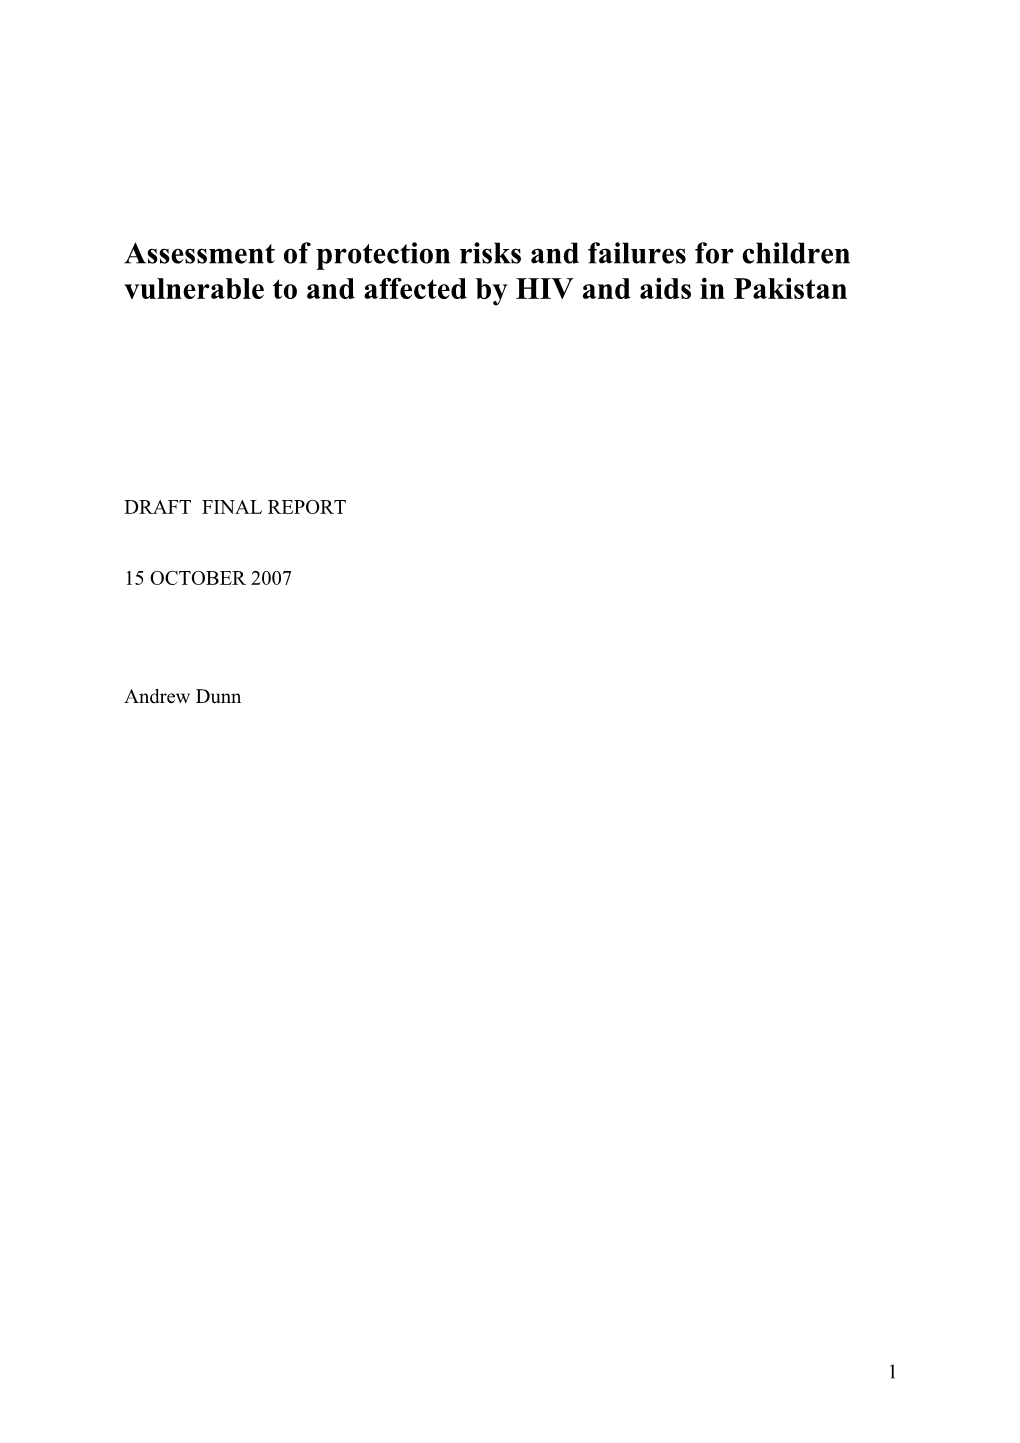 Assessment of Protection Risks and Failures for Children Vulnerable to and Affected By